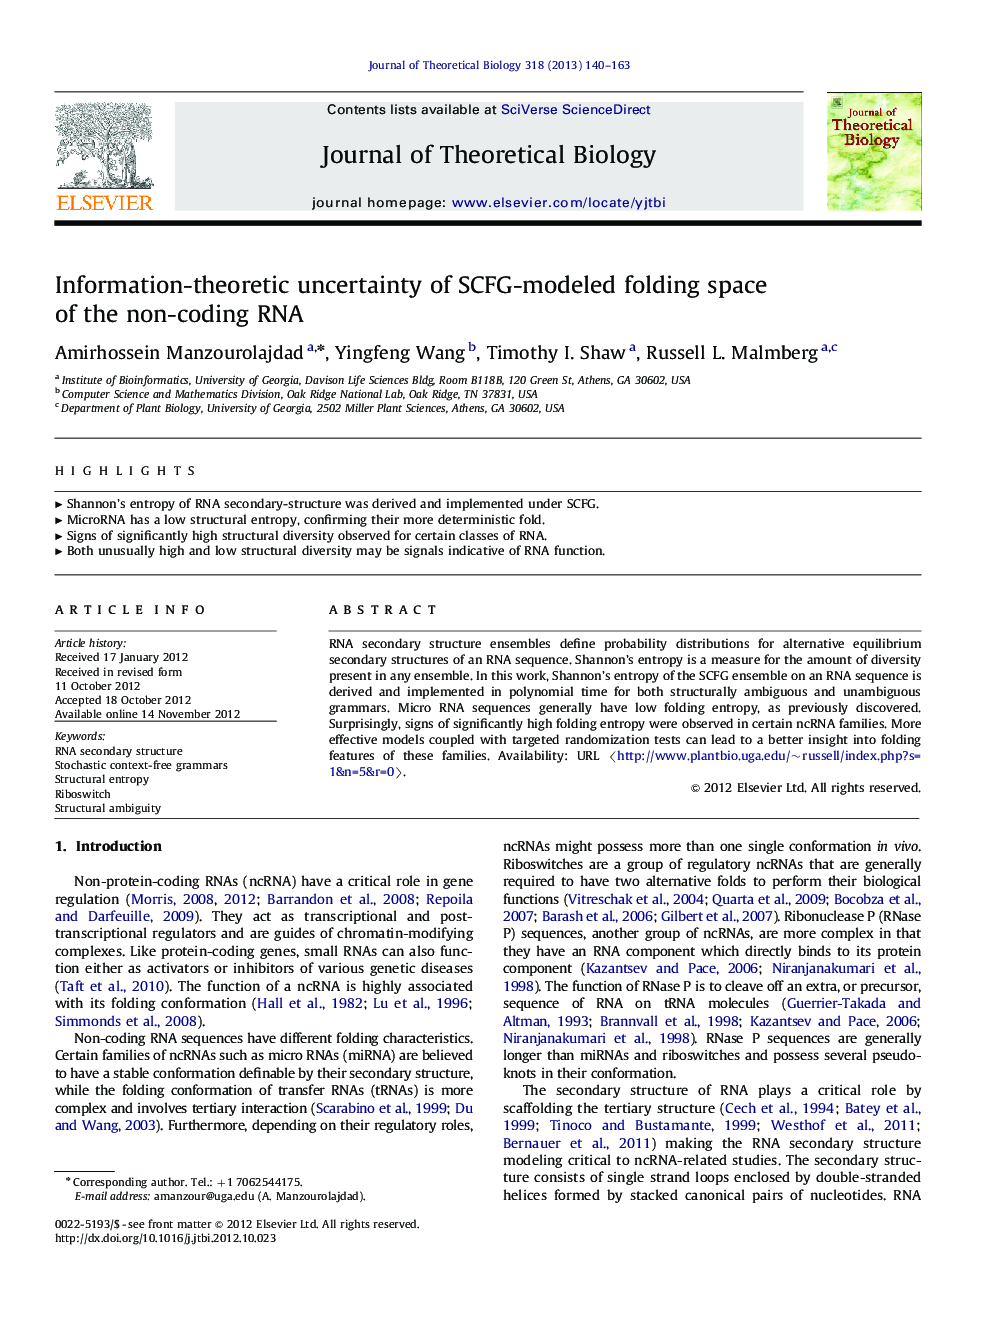 Information-theoretic uncertainty of SCFG-modeled folding space of the non-coding RNA